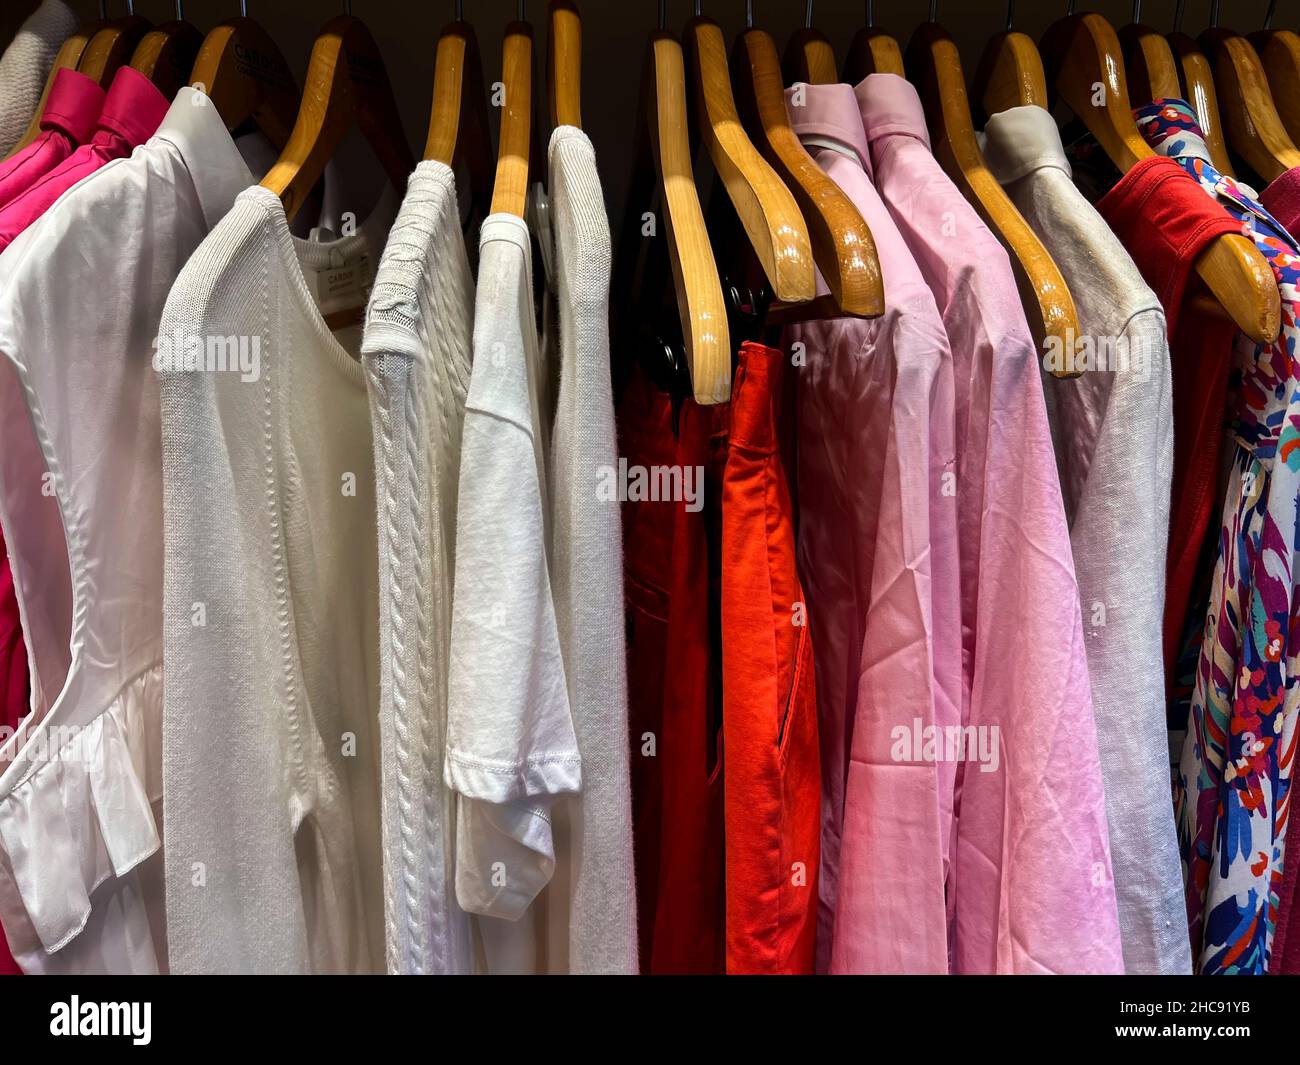 Clothes hanging on rack Stock Photo